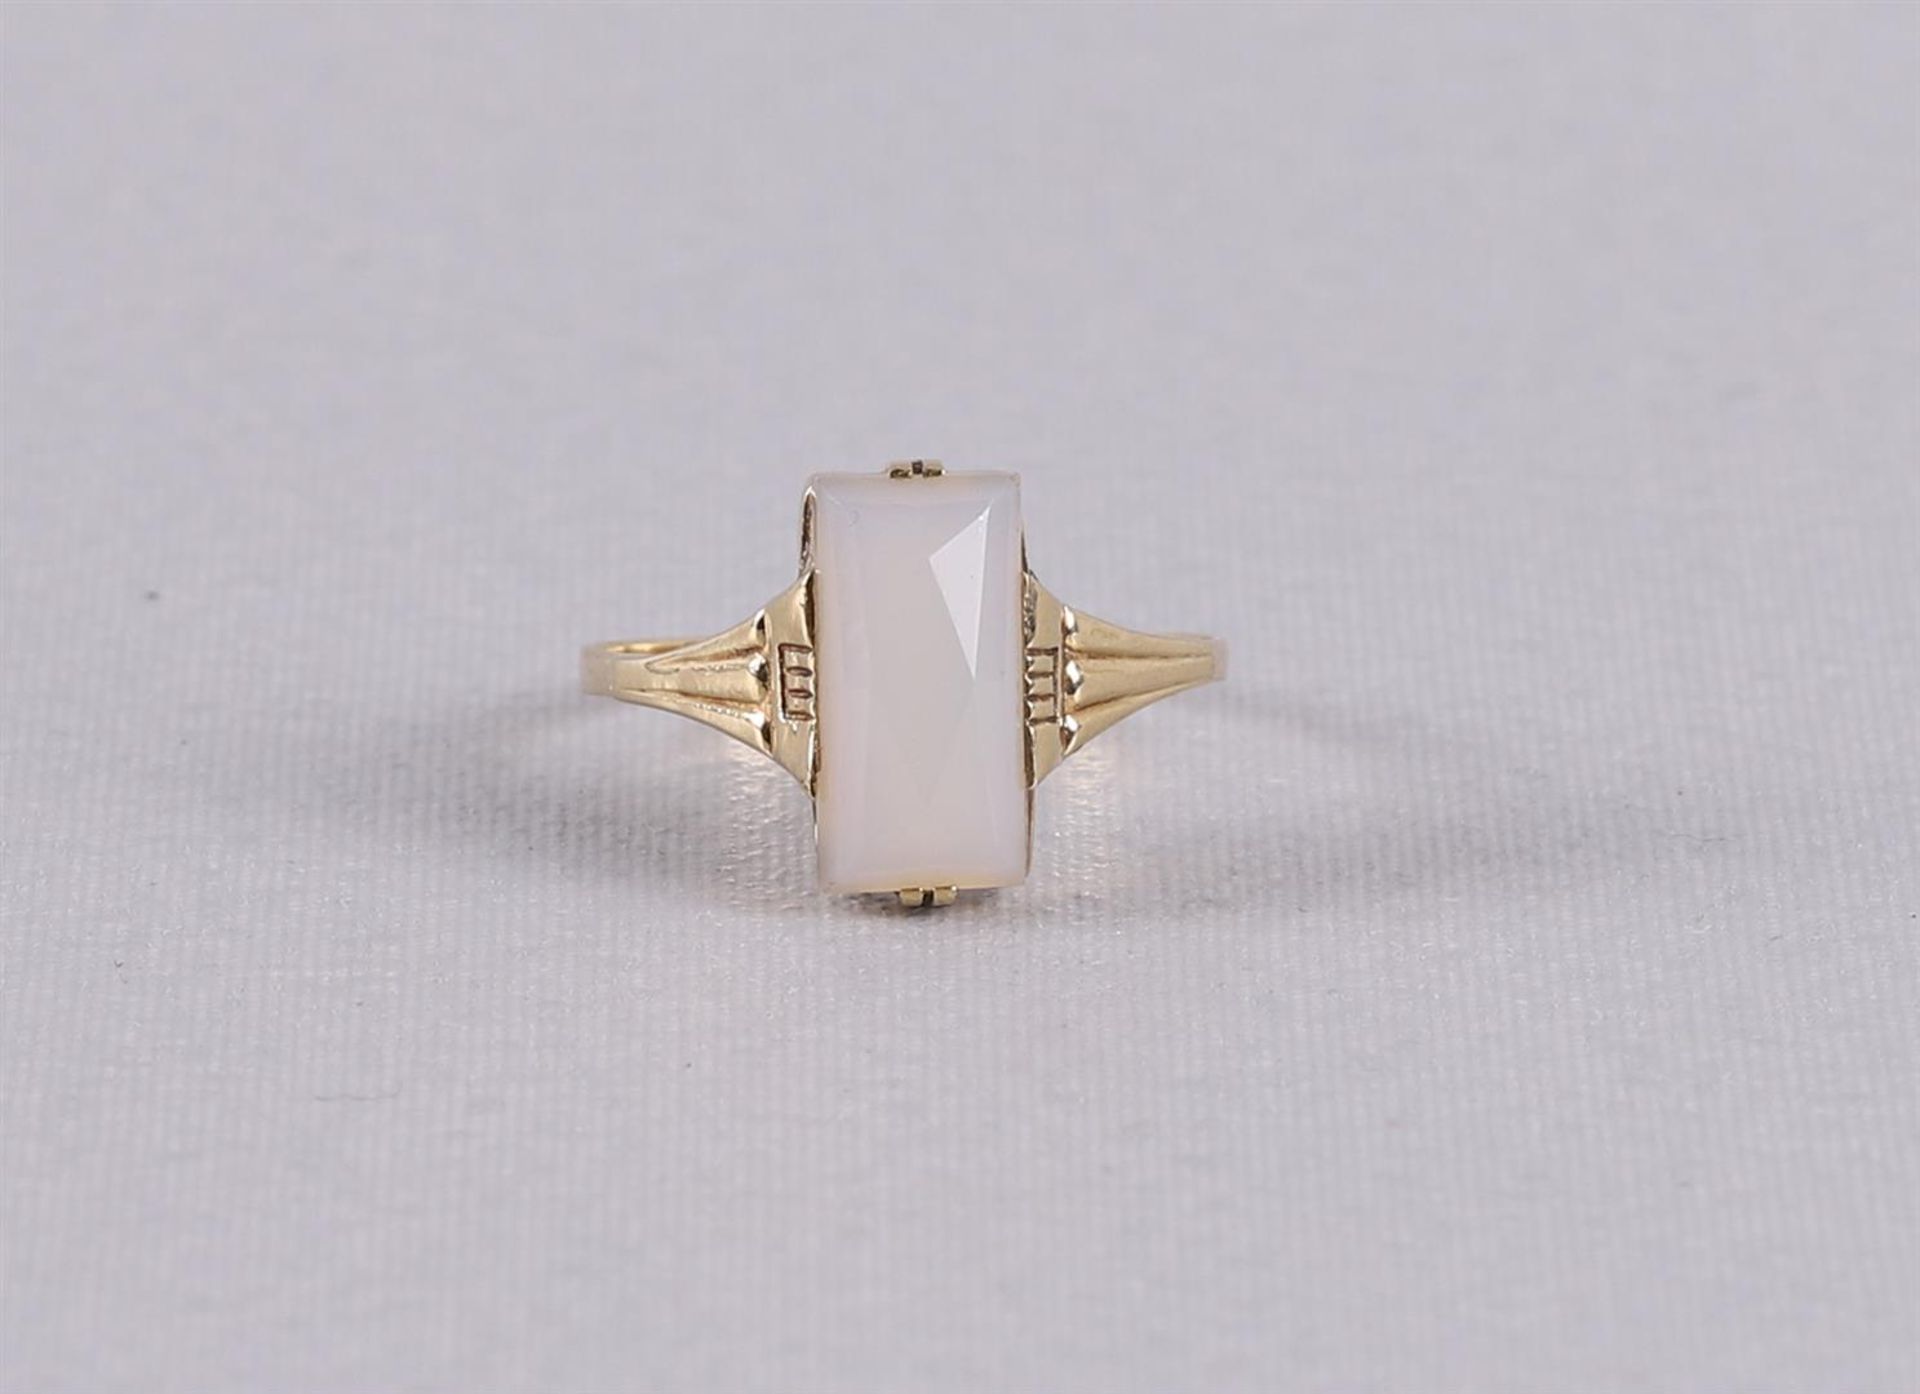 A 14 kt 585/1000 gold Art Deco ring with a facet cut light gray stone. Ring size 18.5 mm.